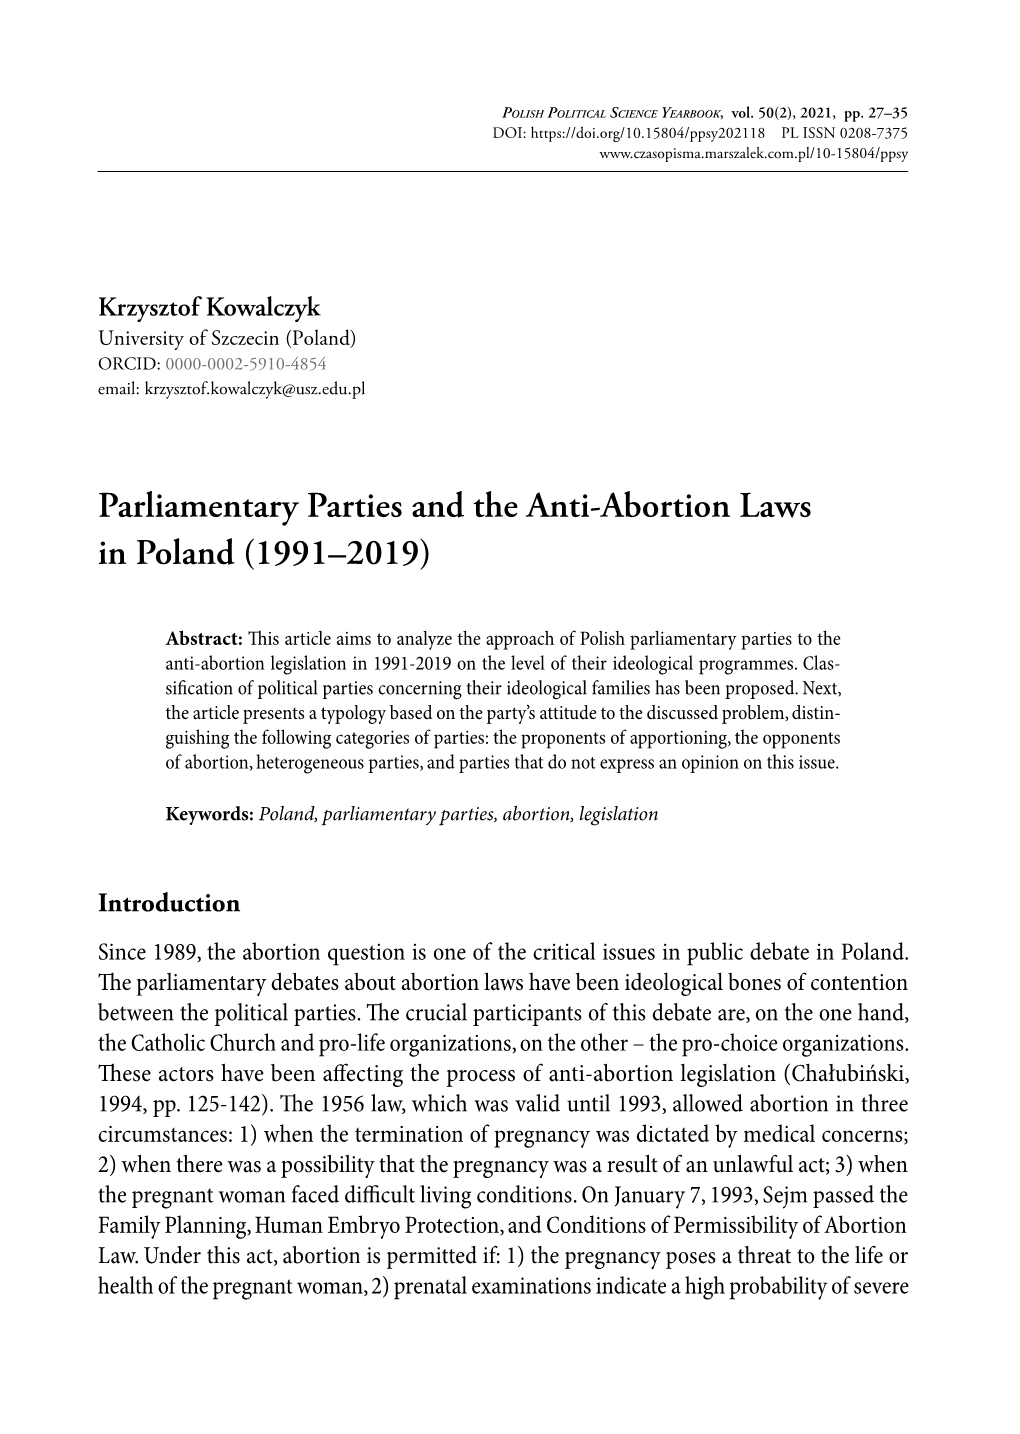 Parliamentary Parties and the Anti-Abortion Laws in Poland (1991–2019)